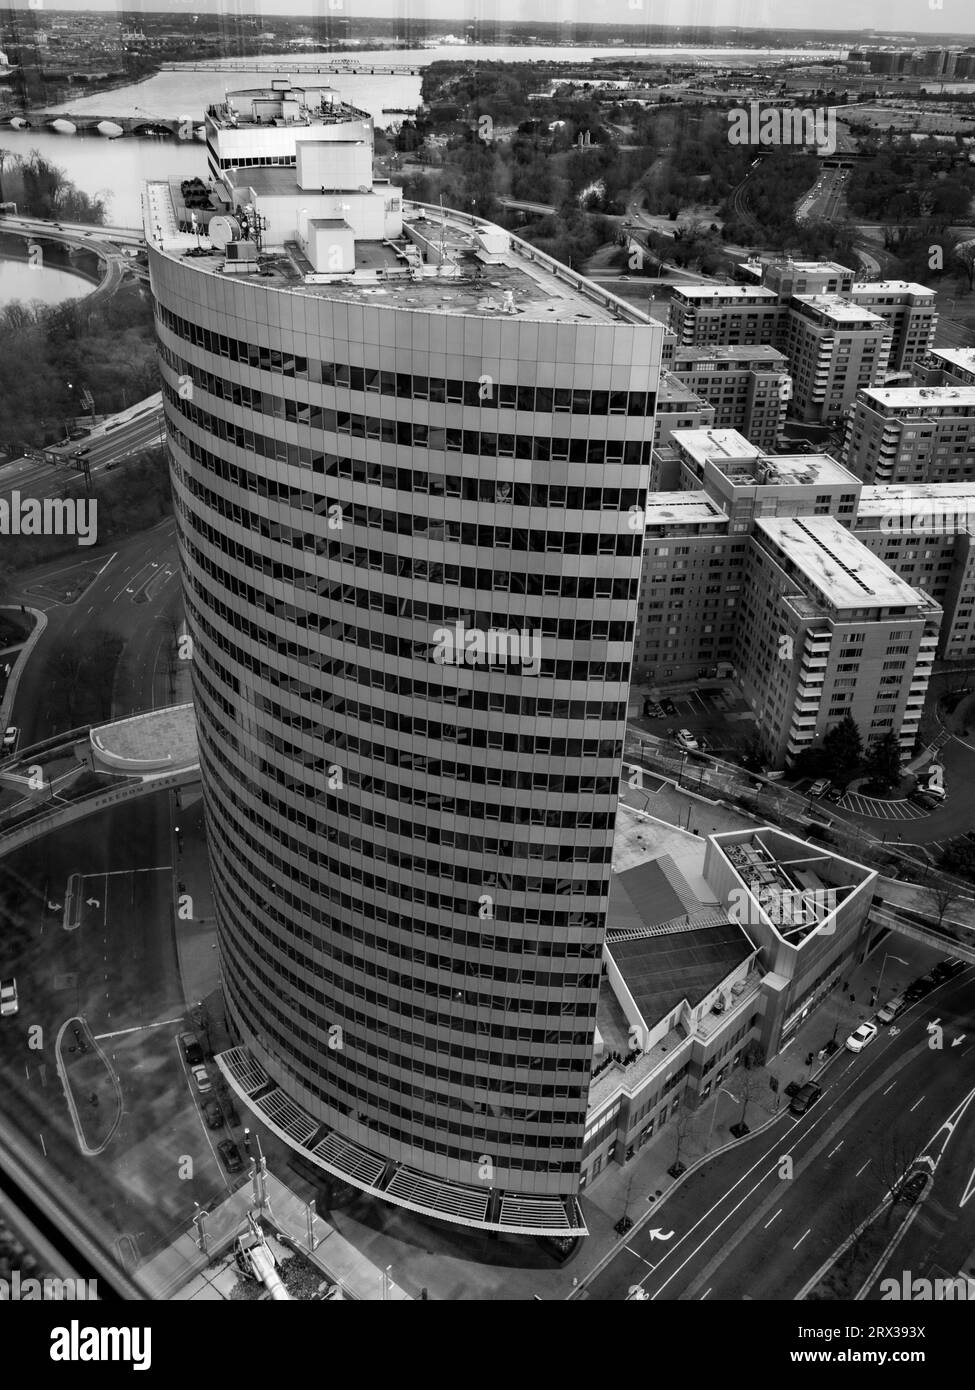 One of the Rosslyn Twin Towers located in Arlington VA. Photo by Liz Roll Stock Photo